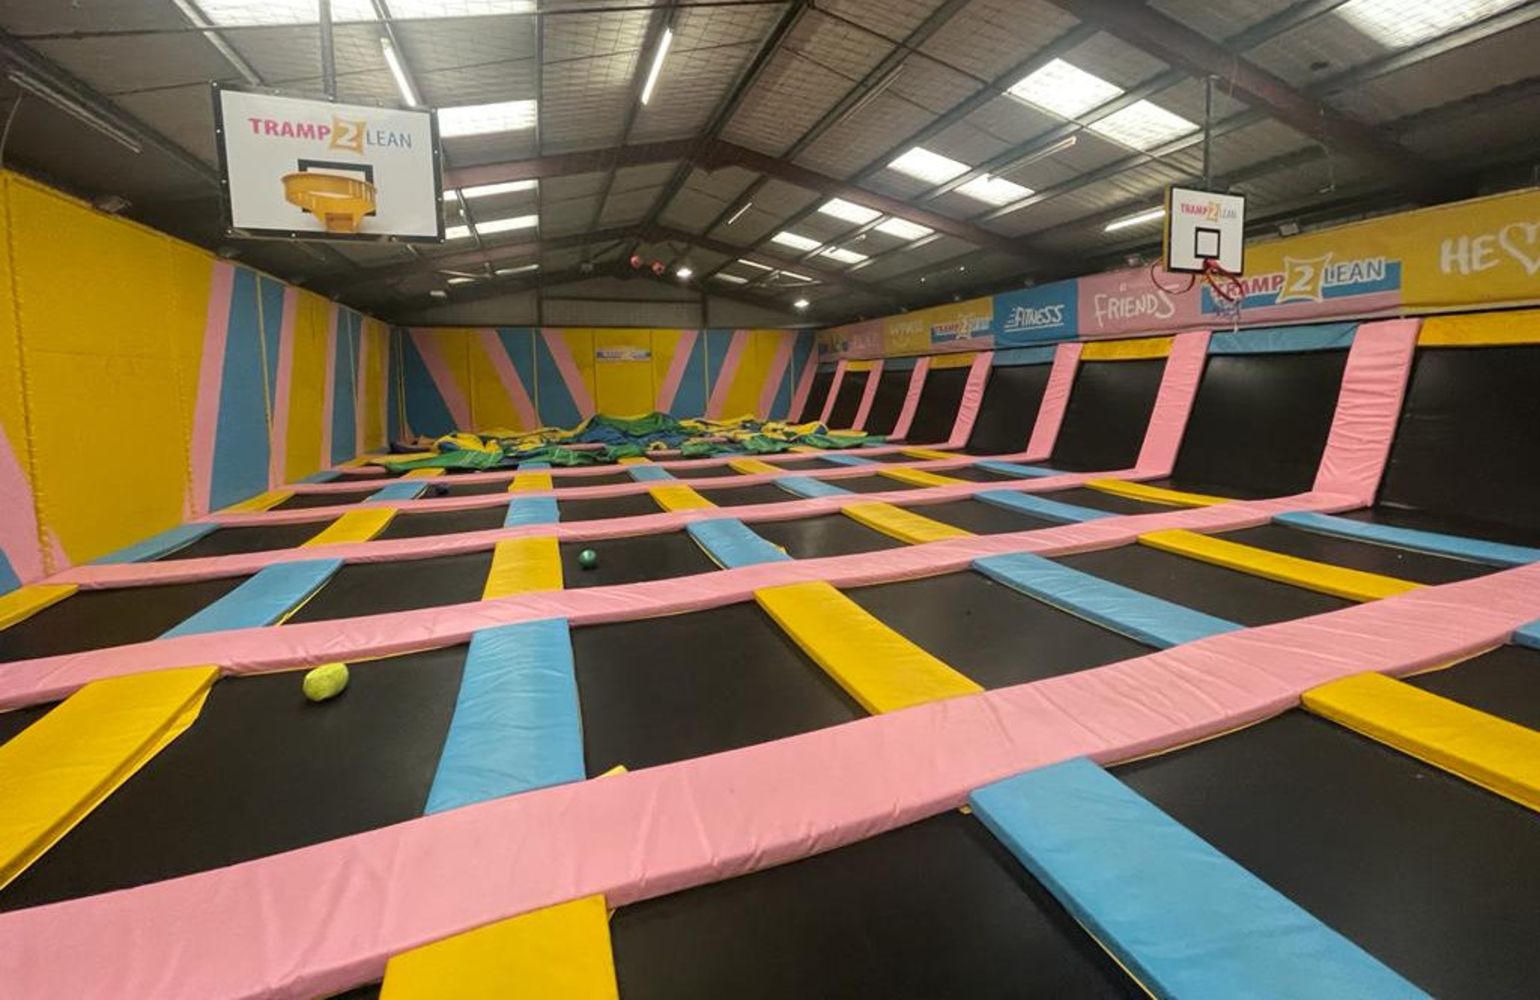 Trampoline Park Plus Contents Including Furniture And EPOS System